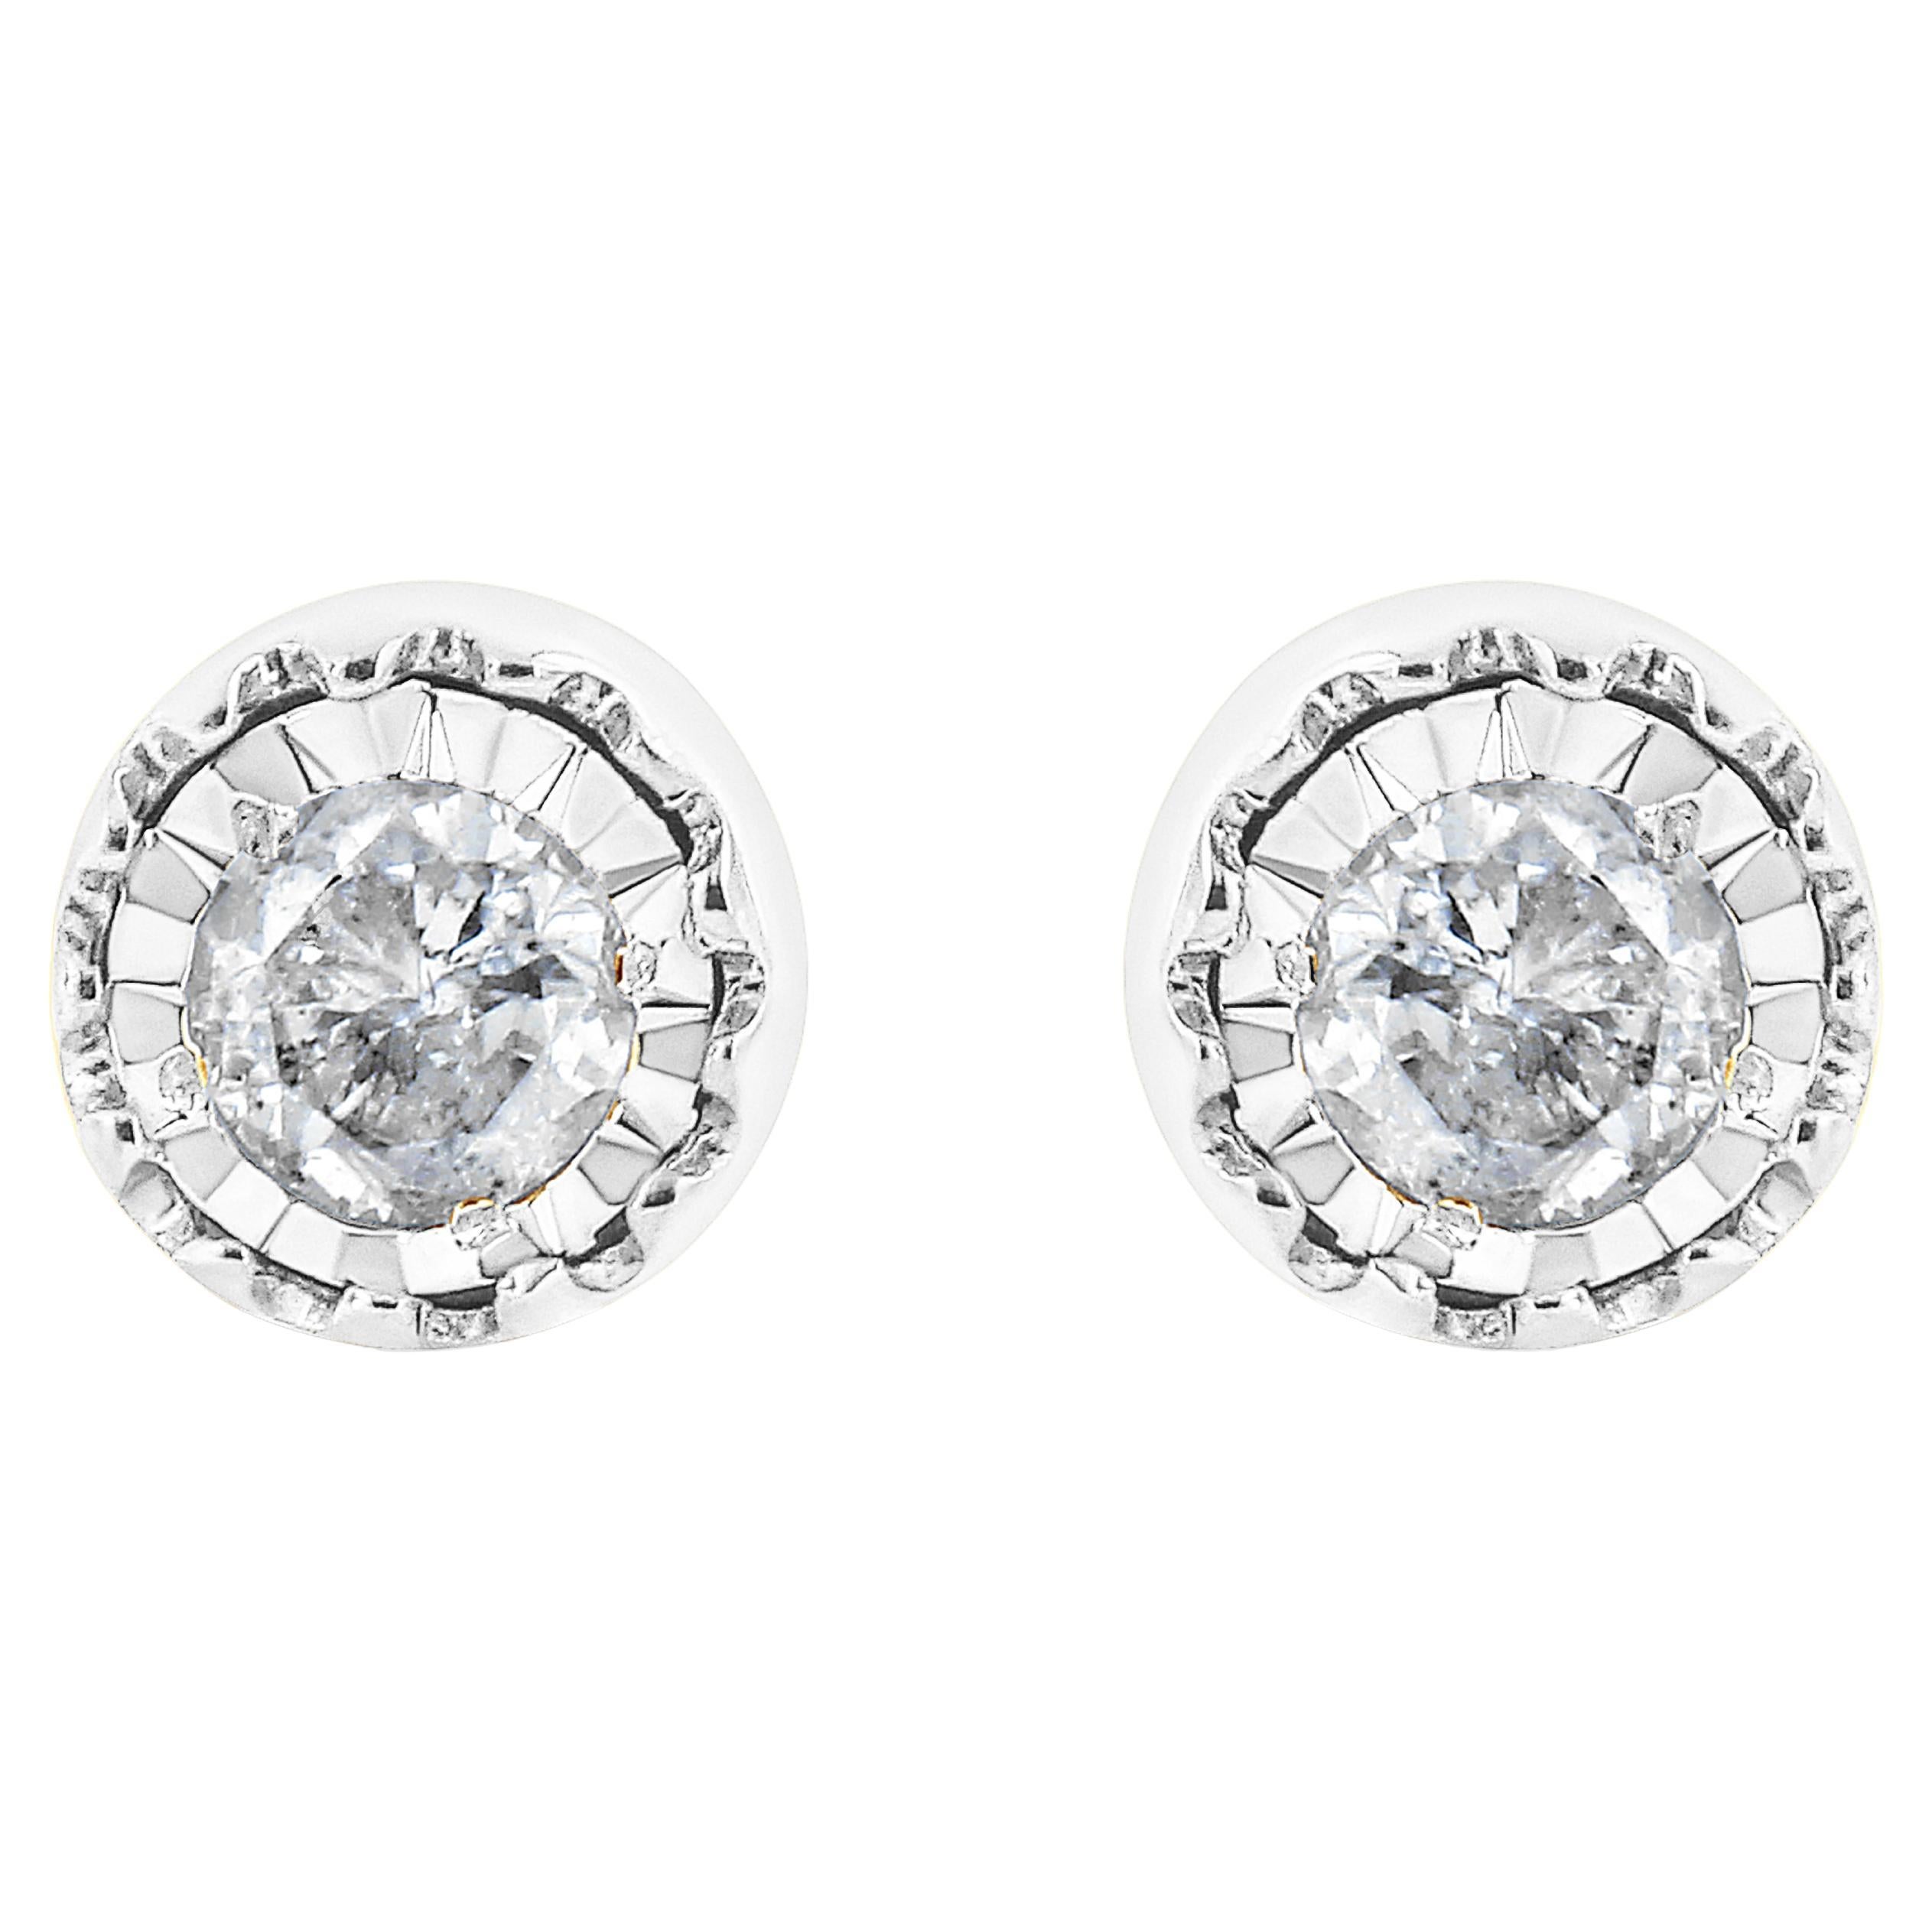 .925 Sterling Silver 3/8 Carat Solitaire Diamond Miracle Set Stud Earrings